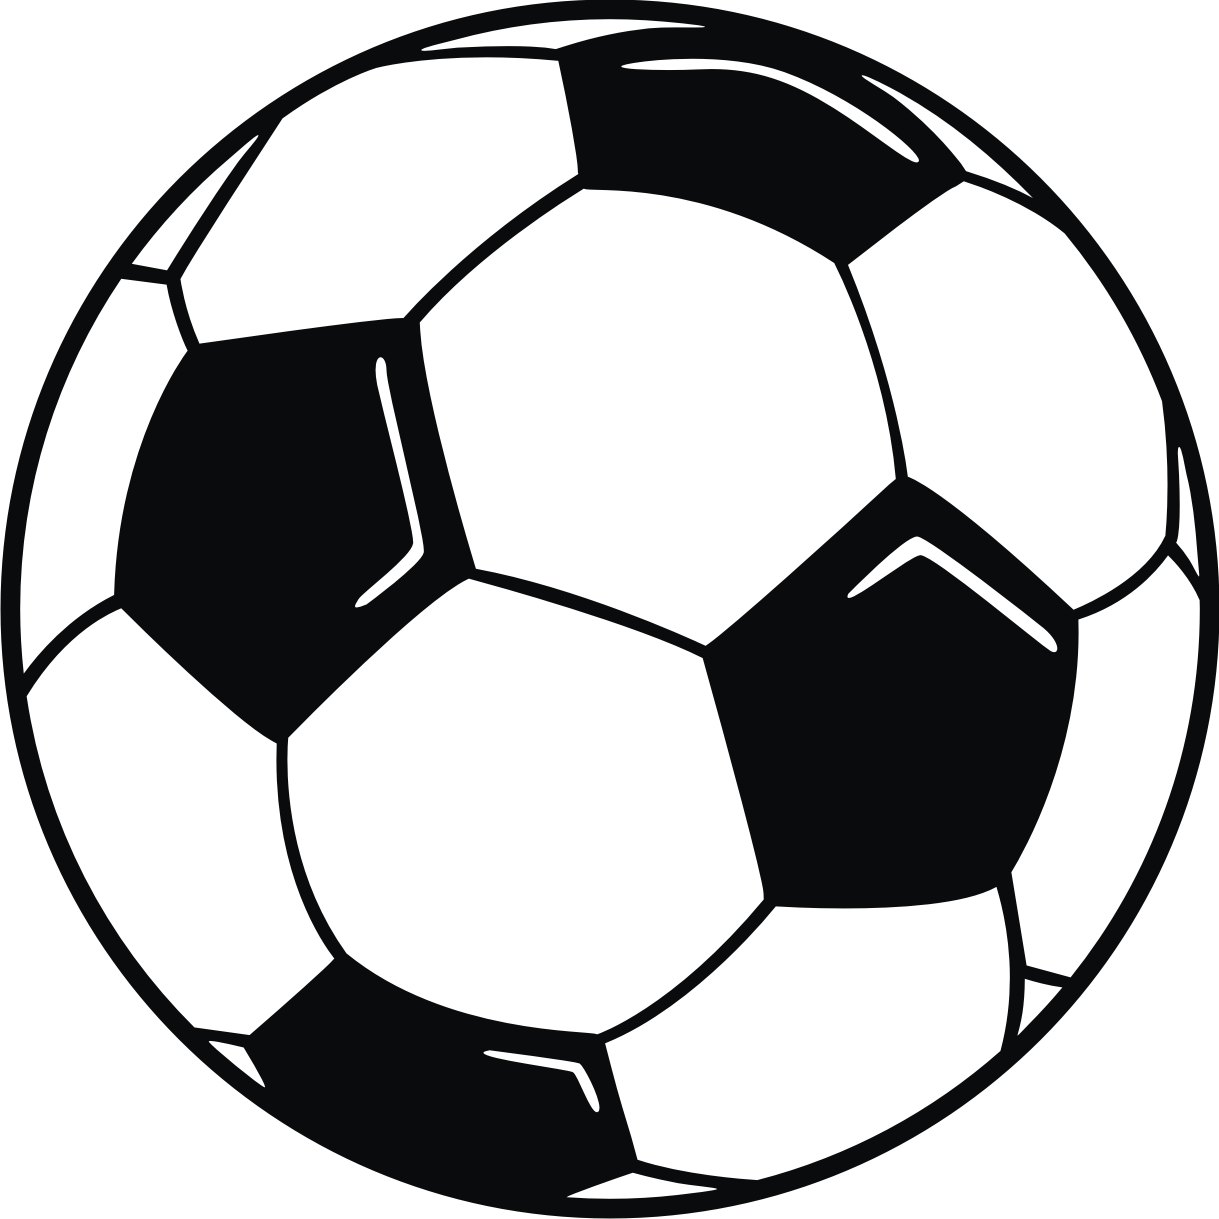 Soccer Ball Border Clip Art | Clipart library - Free Clipart Images